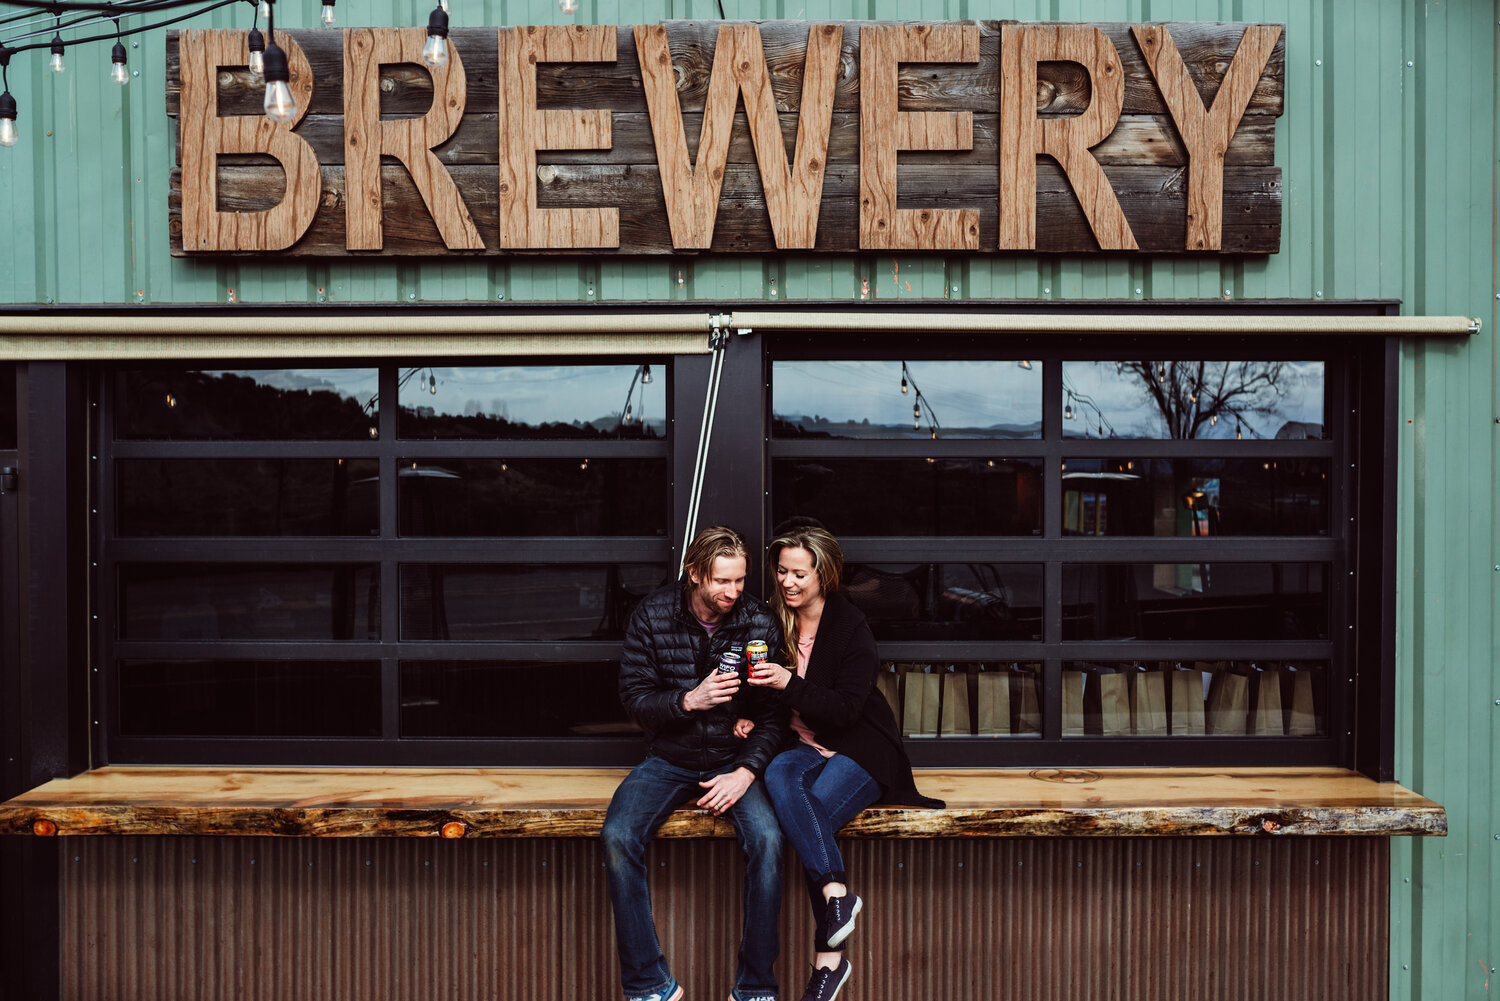 Bonfire Brewing owners Andy and Amanda Jessen